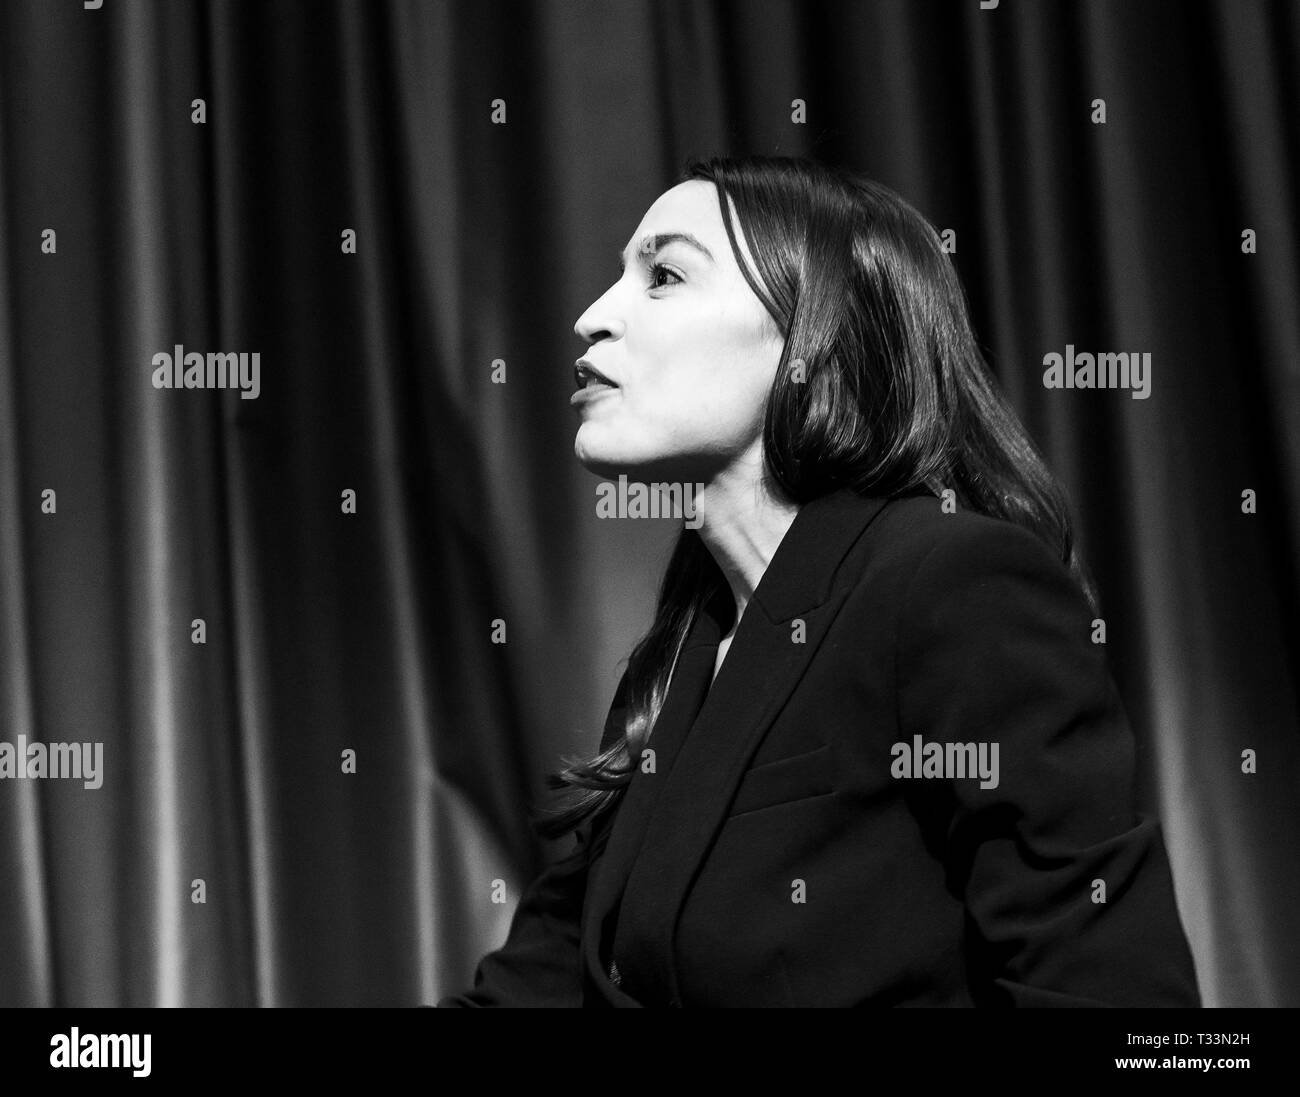 New York, United States. 05th Apr, 2019. US Congresswoman Alexandria Ocasio-Cortez attends National Action Network 2019 convention at Sheraton Times Square. Credit: Lev Radin/Pacific Press/Alamy Live News Stock Photo